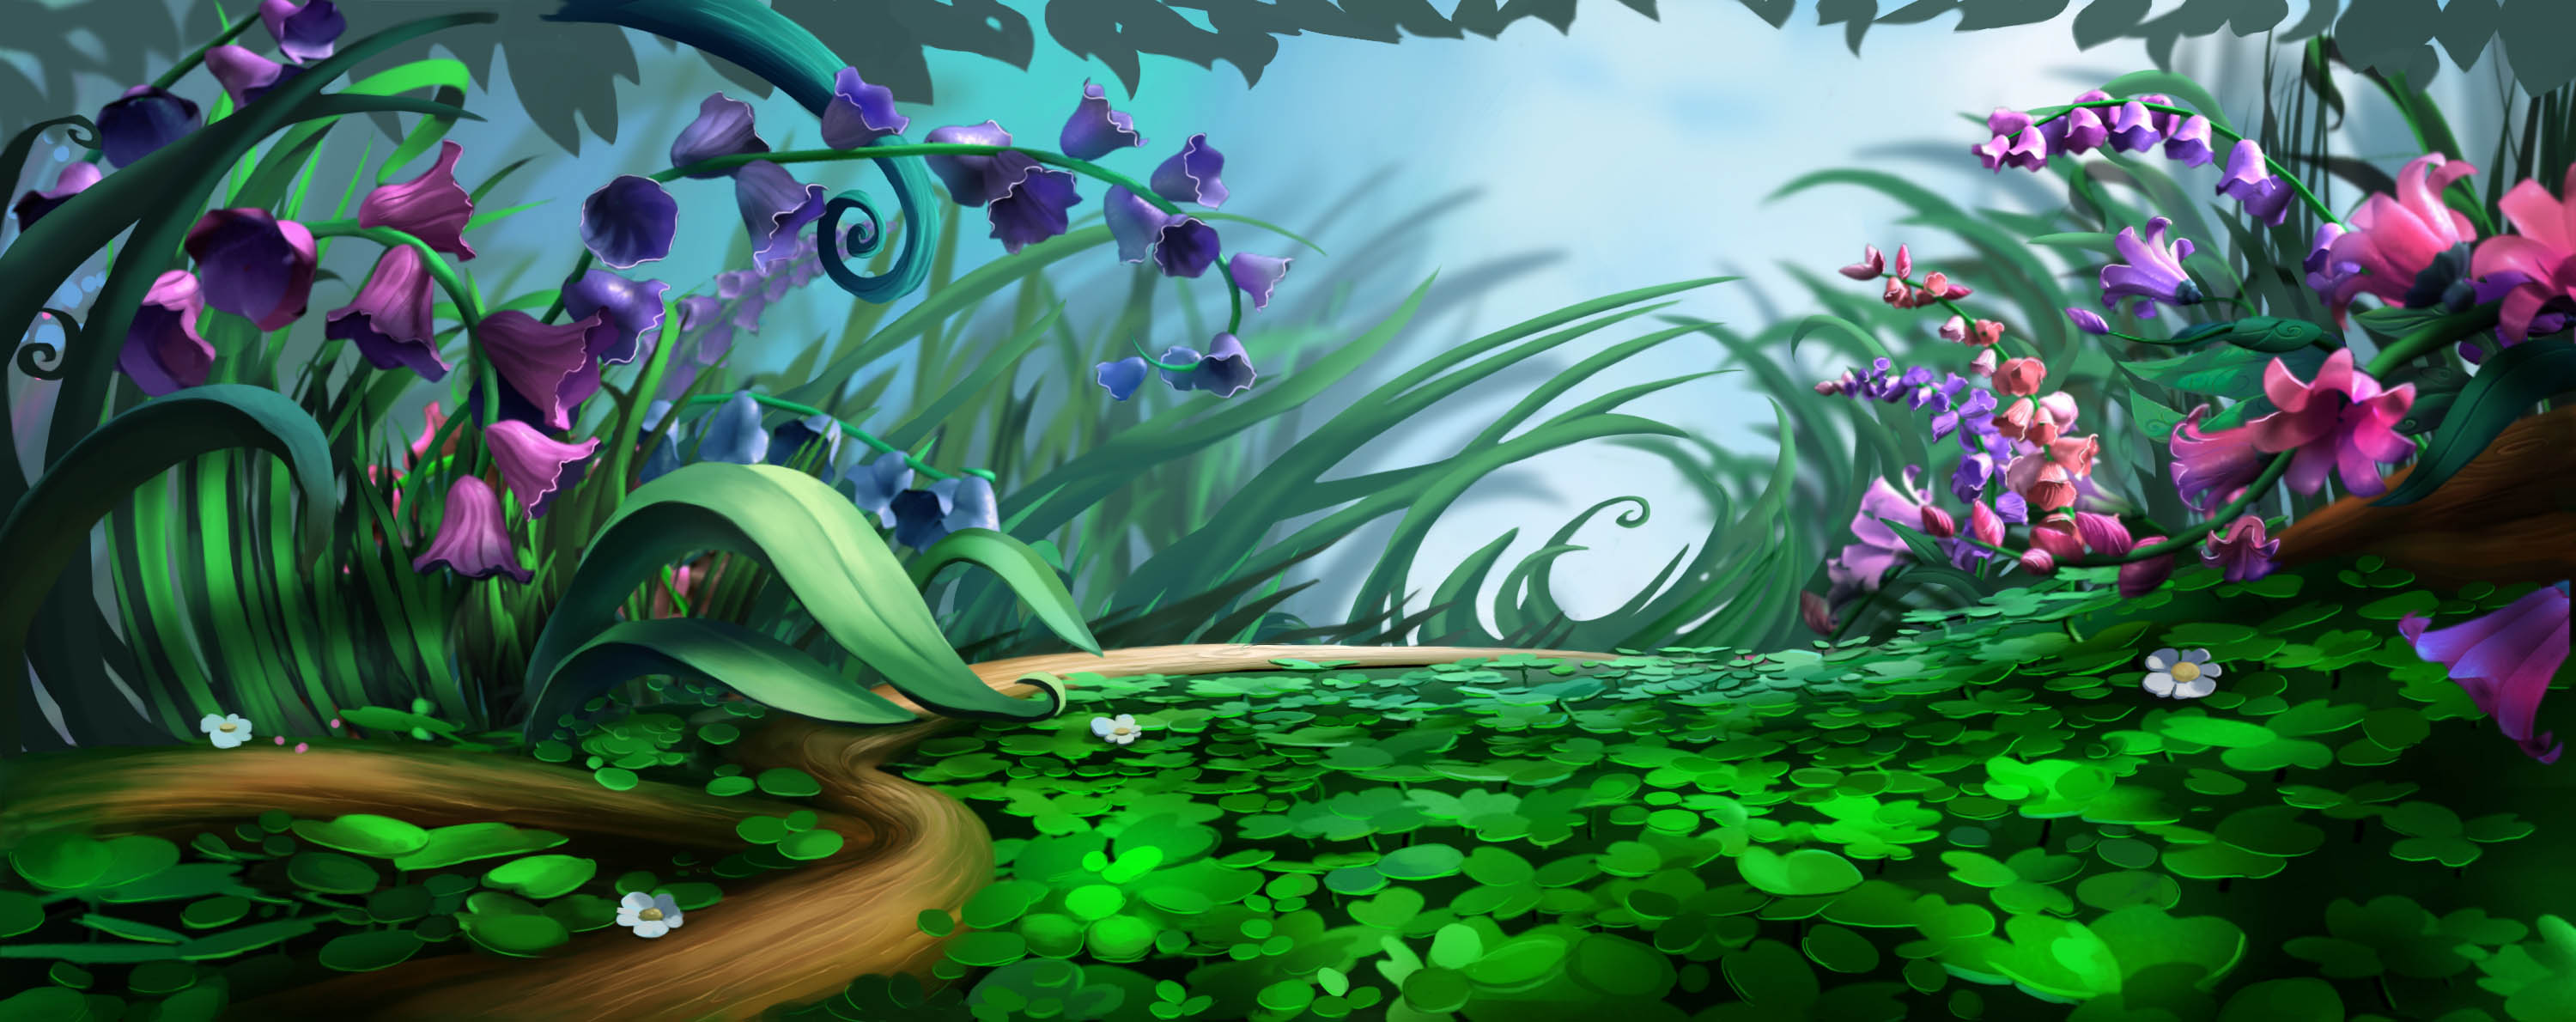 Pixie hollow online play now